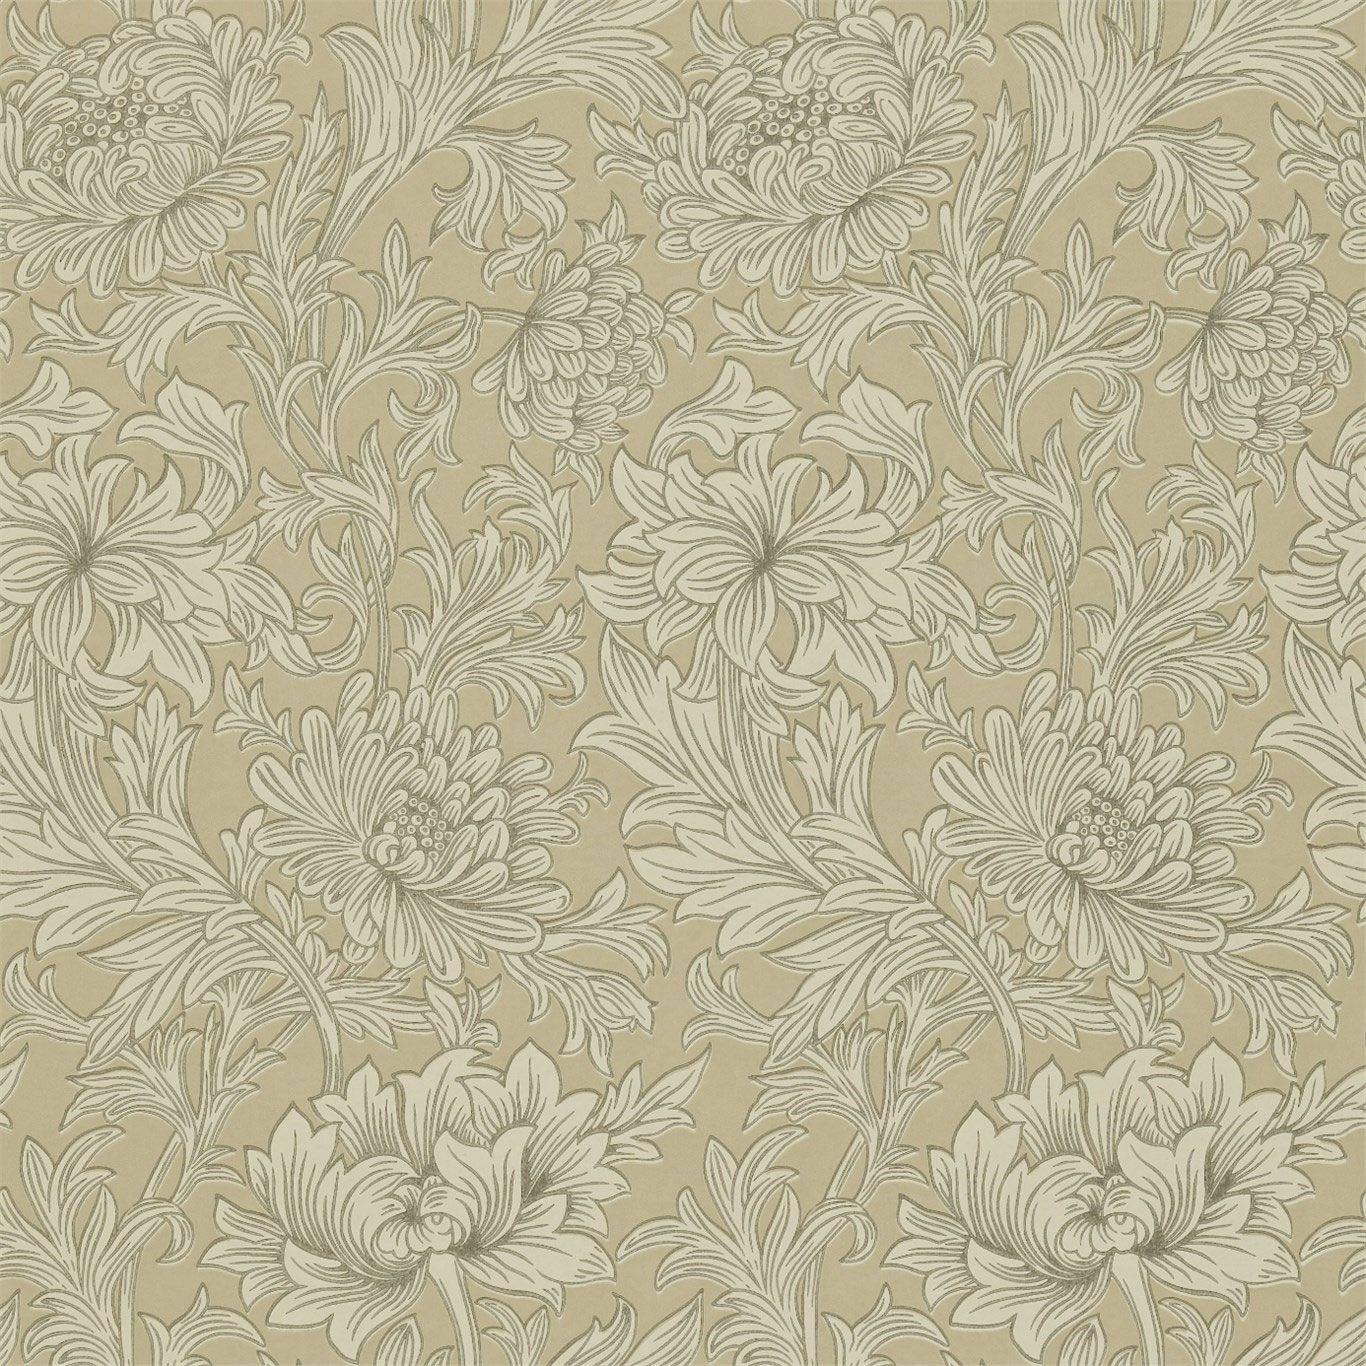 Buy Ivory Gold Modern Damask Design Wallpaper By Konark Decor Online   Pattern  Textures Wallpapers  Wallpapers  Furnishings  Pepperfry Product